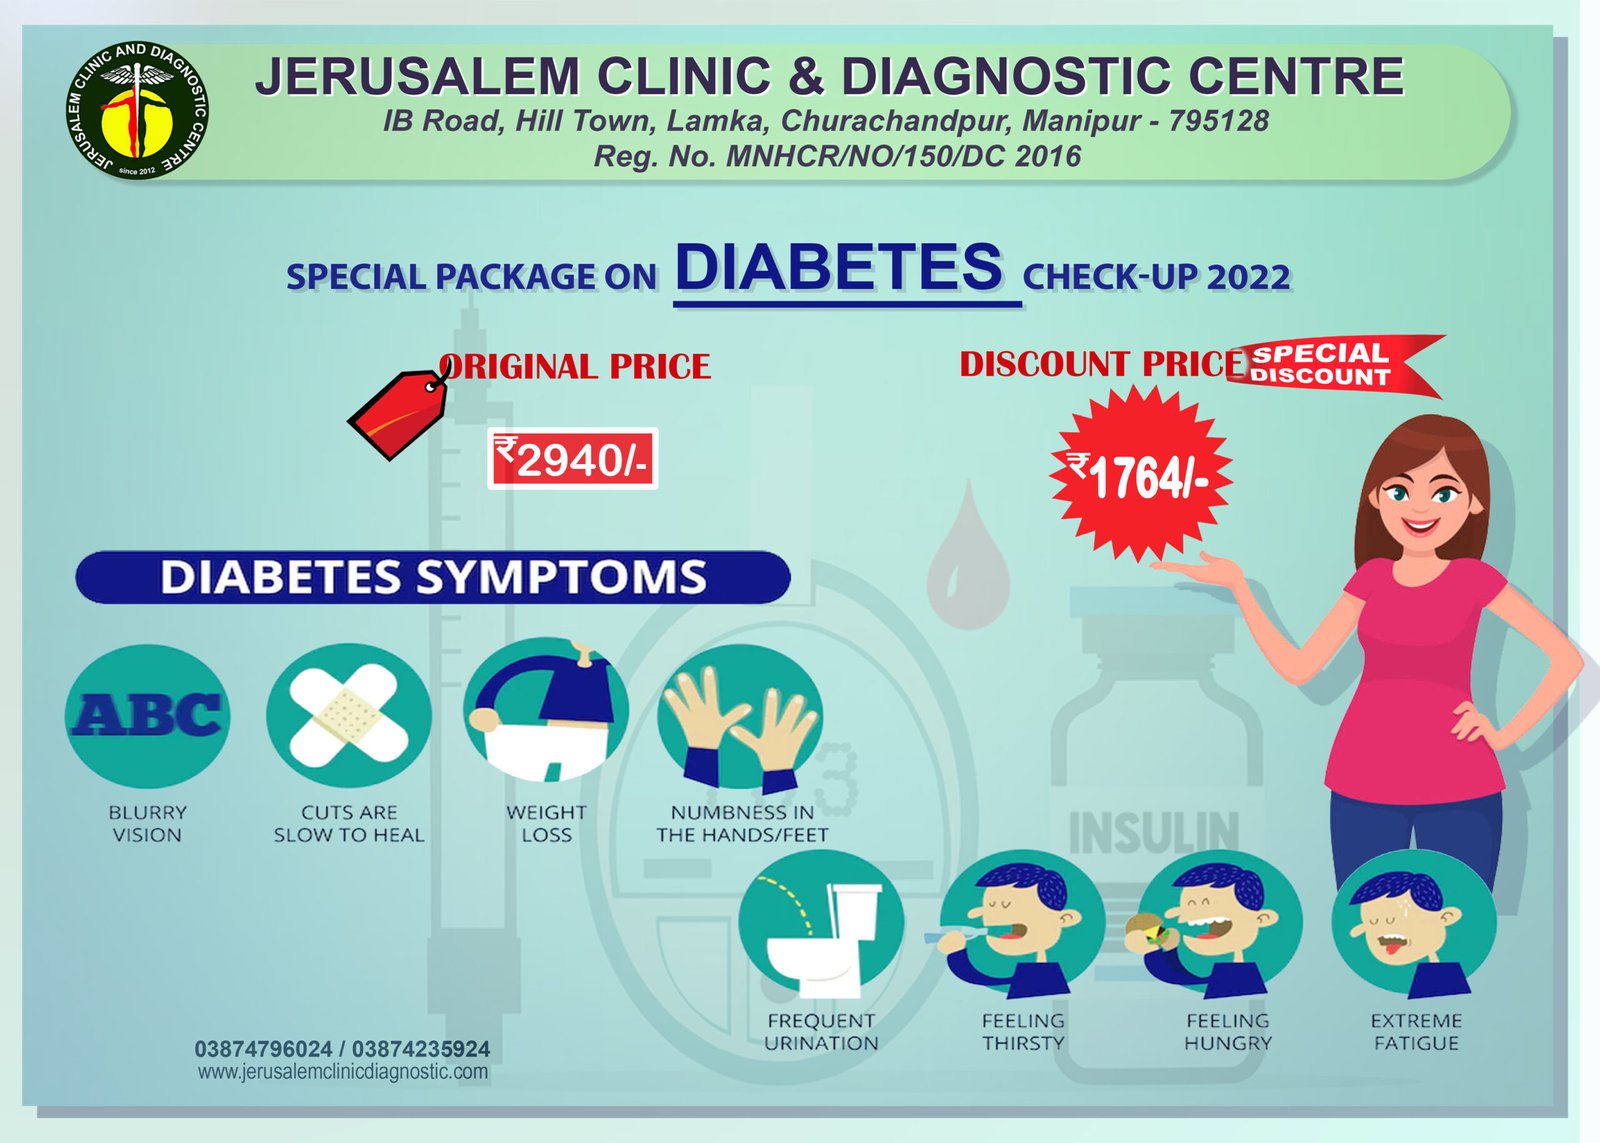 You are currently viewing Diabetes Checkup Offer @Jerusalem Clinic 2022